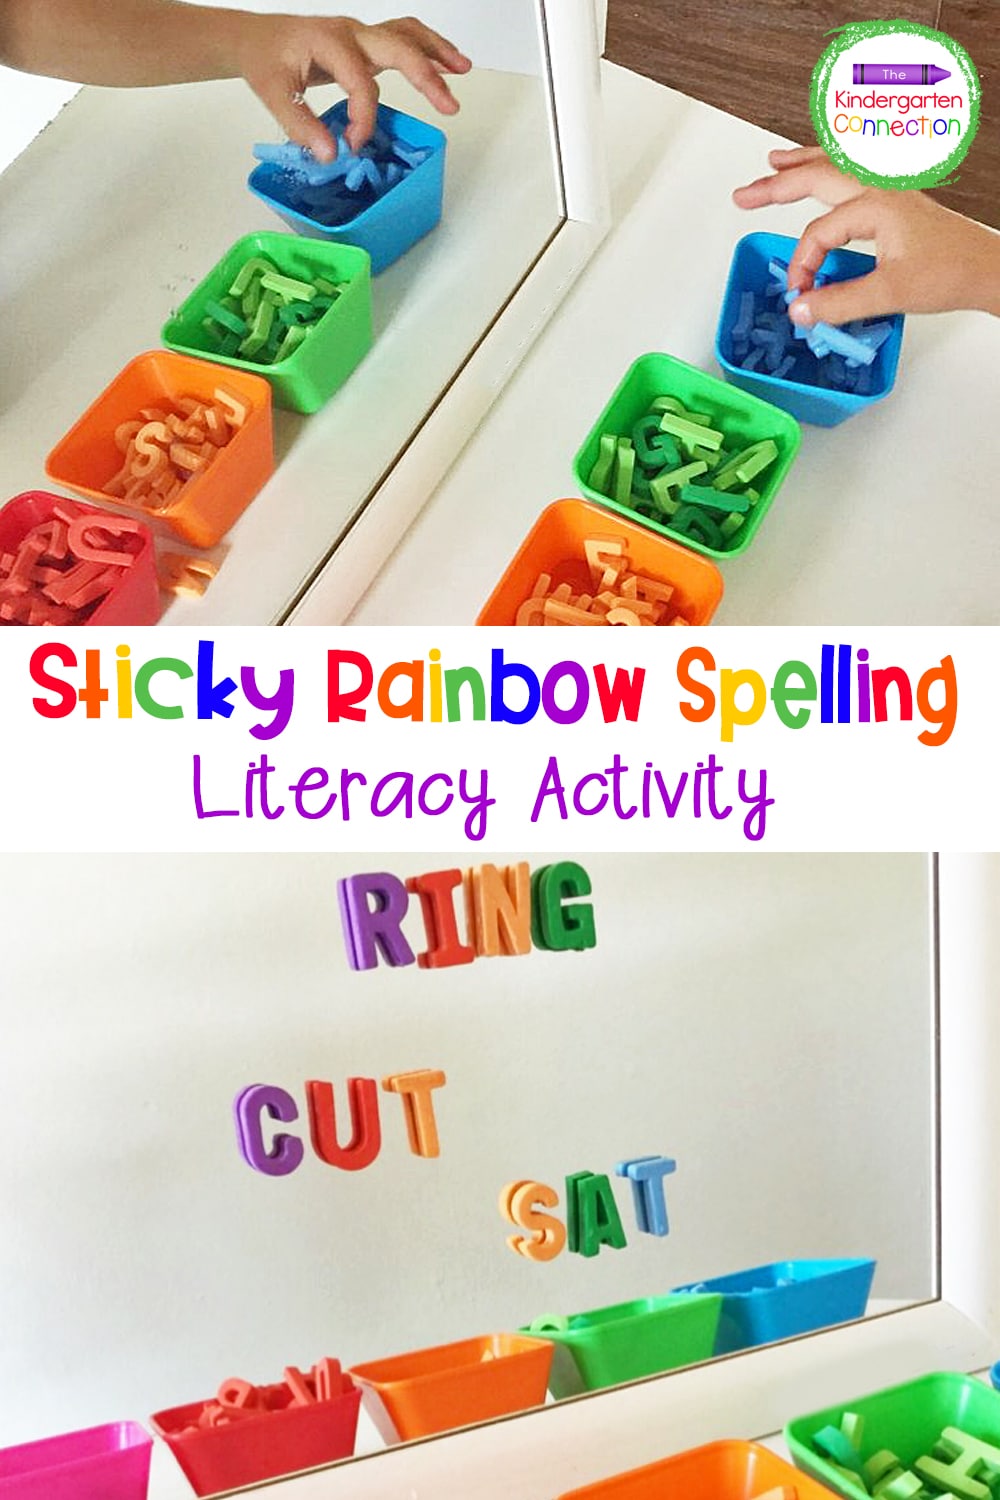 This sticky rainbow spelling activity is perfect for working on spelling and sight words with Kindergarten and 1st grade students! Such a hands-on, multi-sensory way to learn. They will have so much fun with this word work center! 